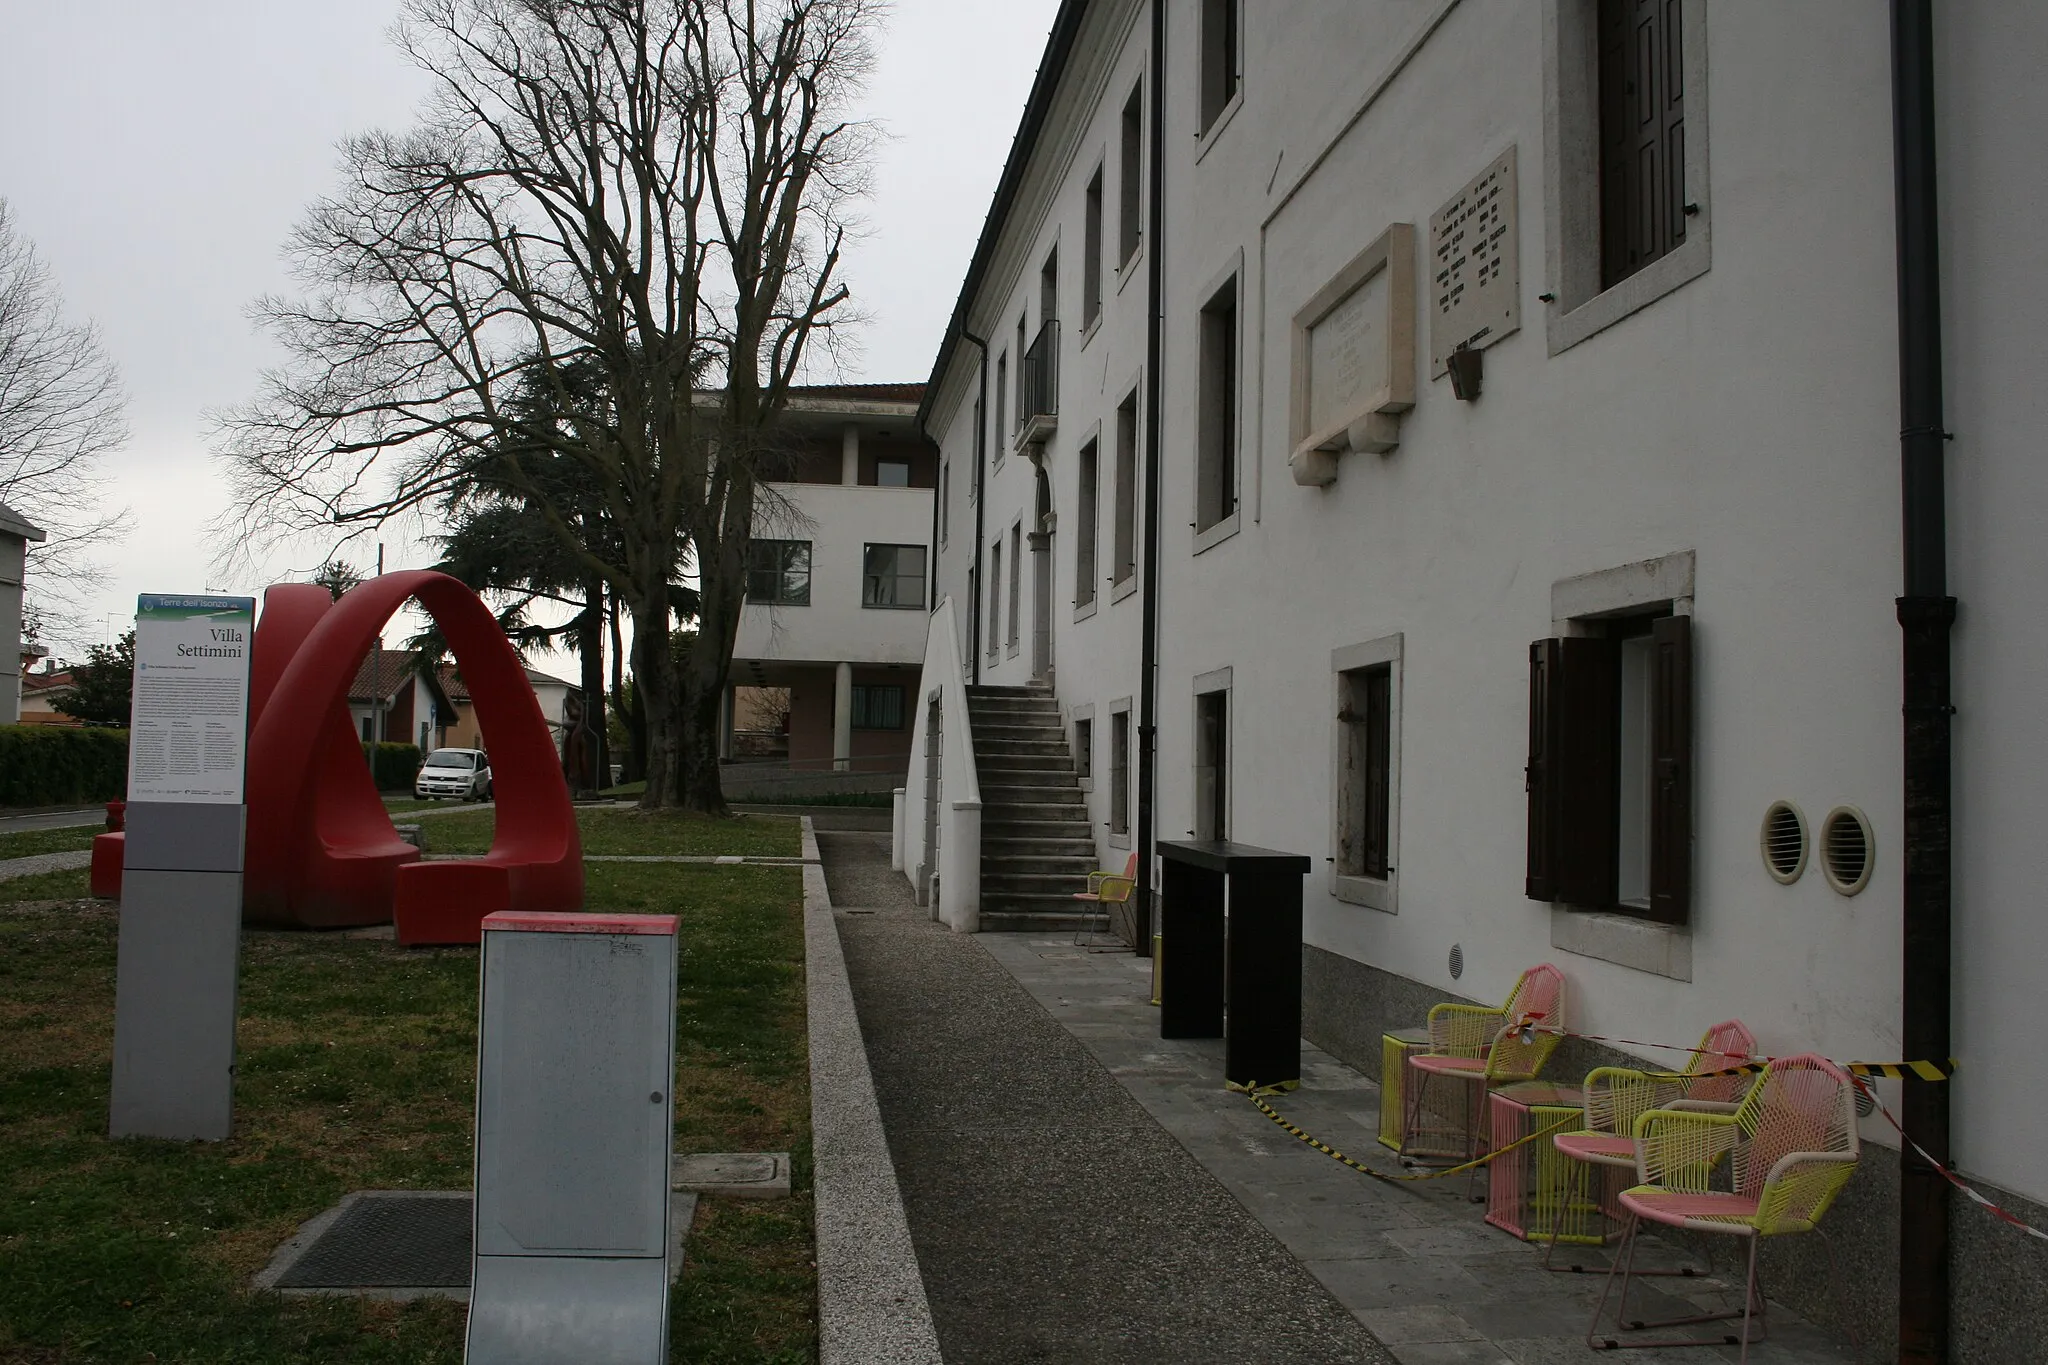 Photo showing: The image constitutes an overall view of the area behind the Villa Settimini.